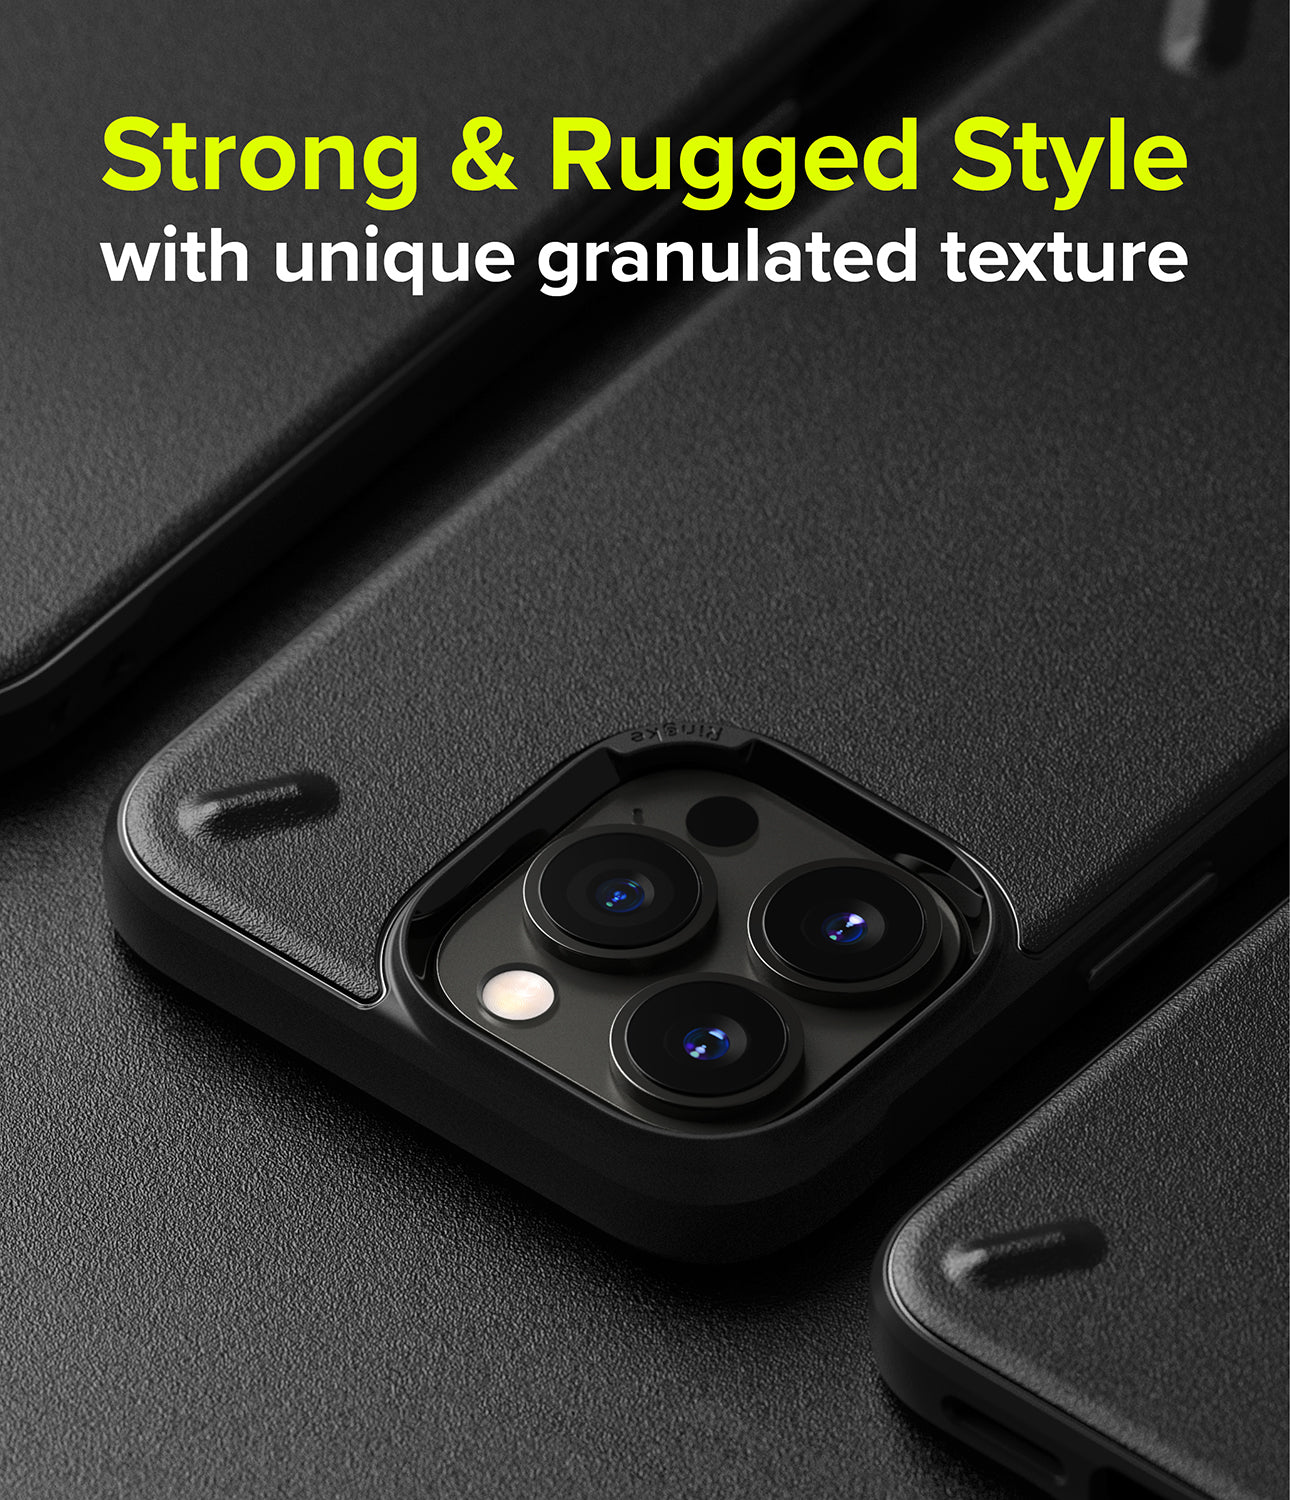 Ringke Onyx Case Compatible with iPhone 13 Pro, Tough Rugged TPU Heavy Duty Protective Cover - Black